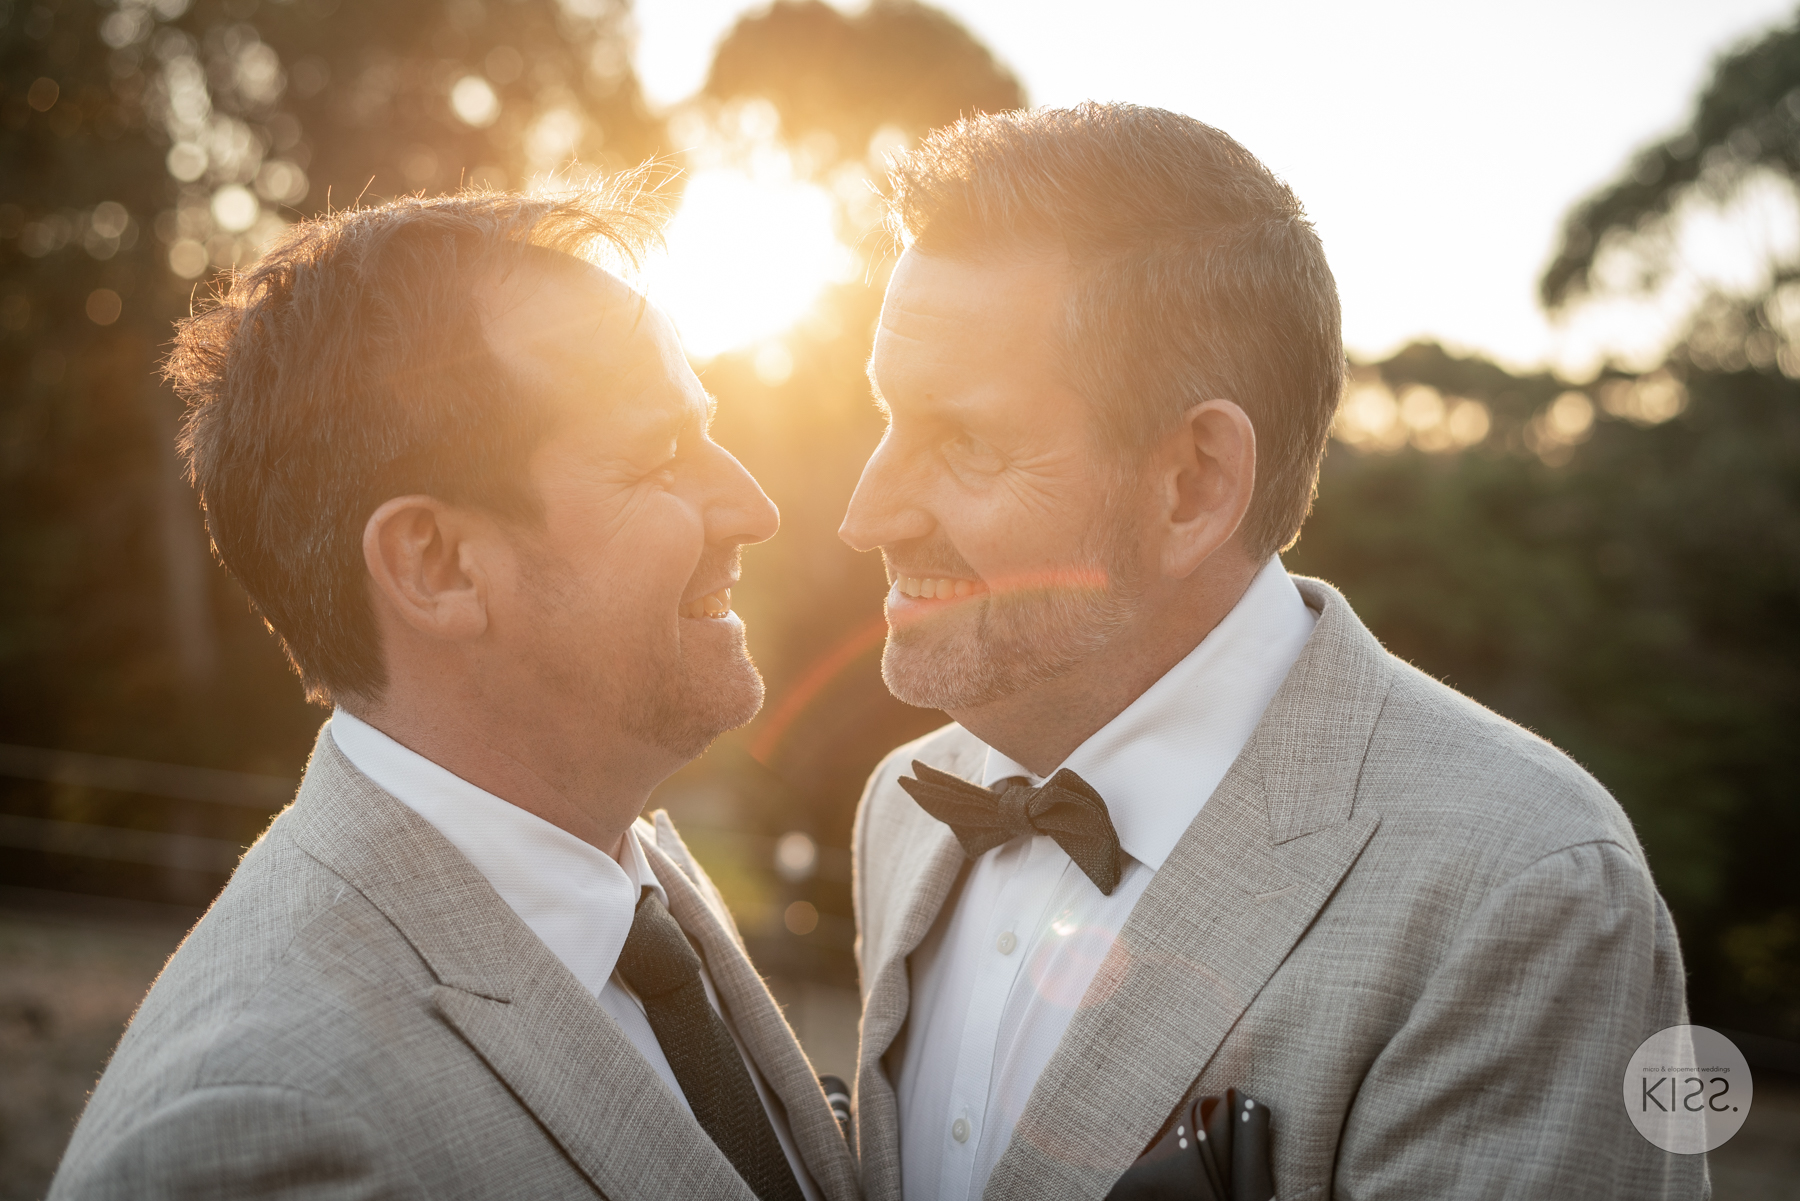 Love knows no bounds. All couples are welcome here. LGBT Weddings